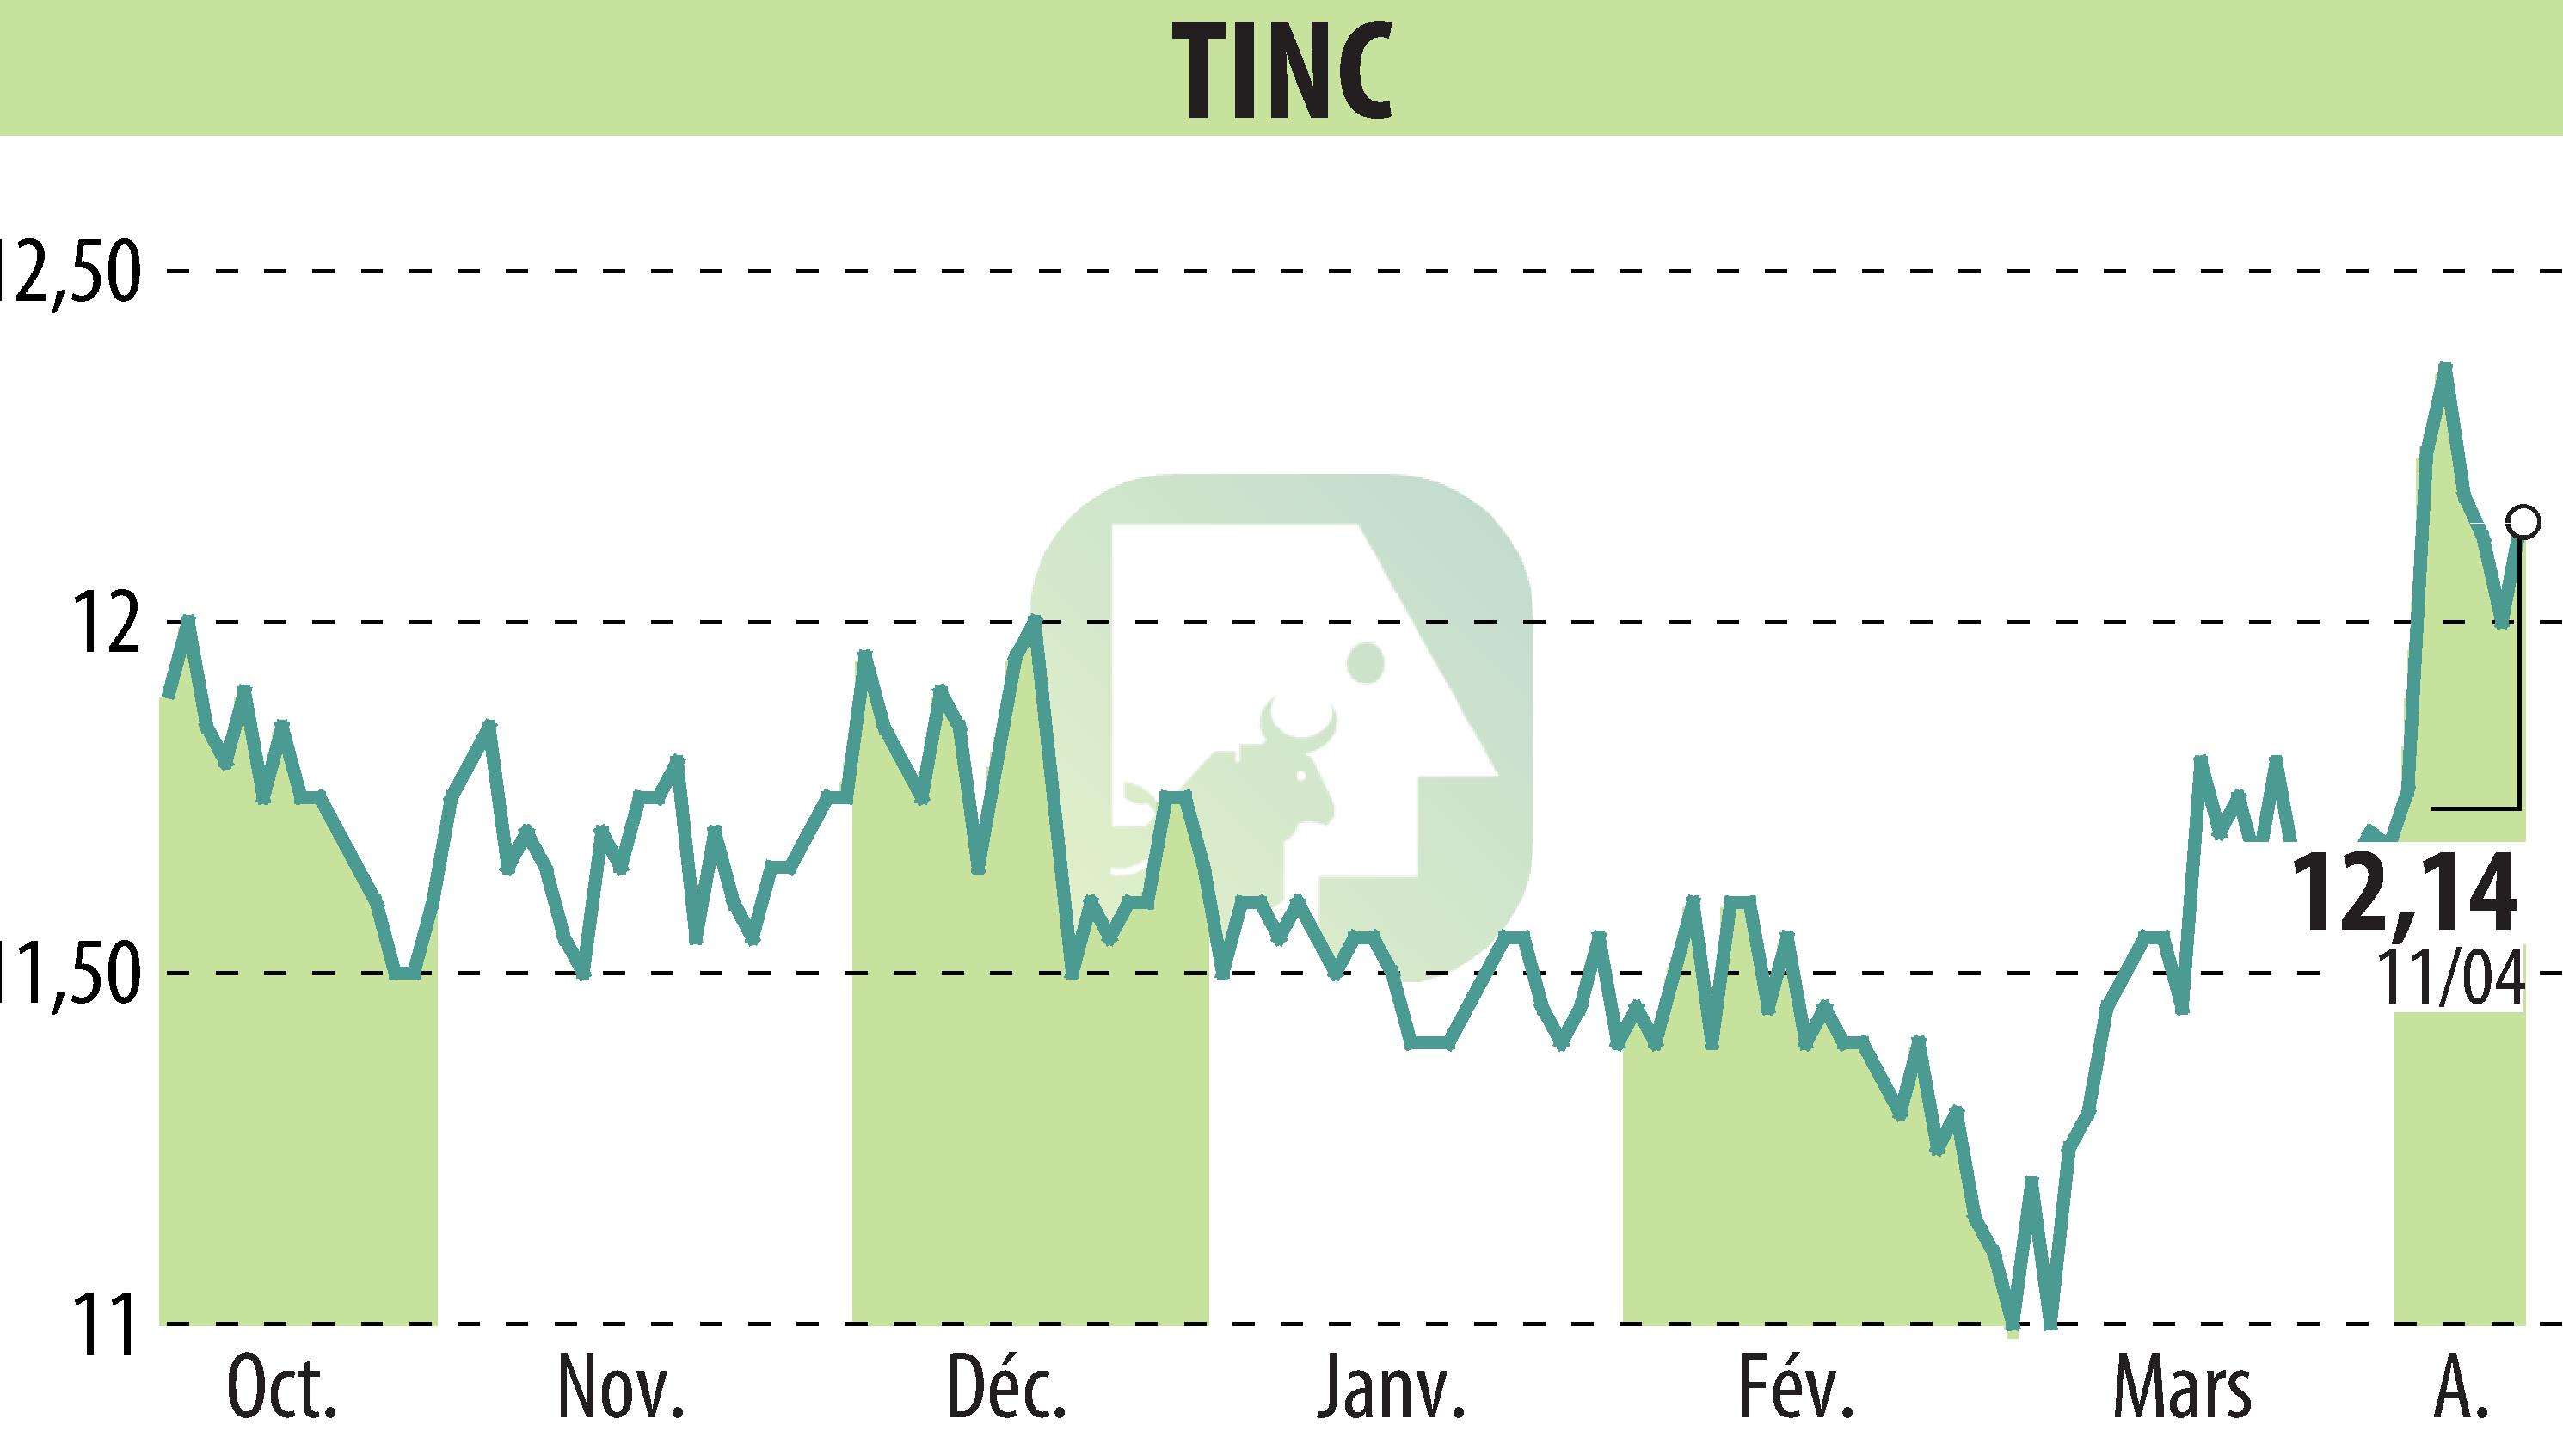 Stock price chart of TINC (EBR:TINC) showing fluctuations.